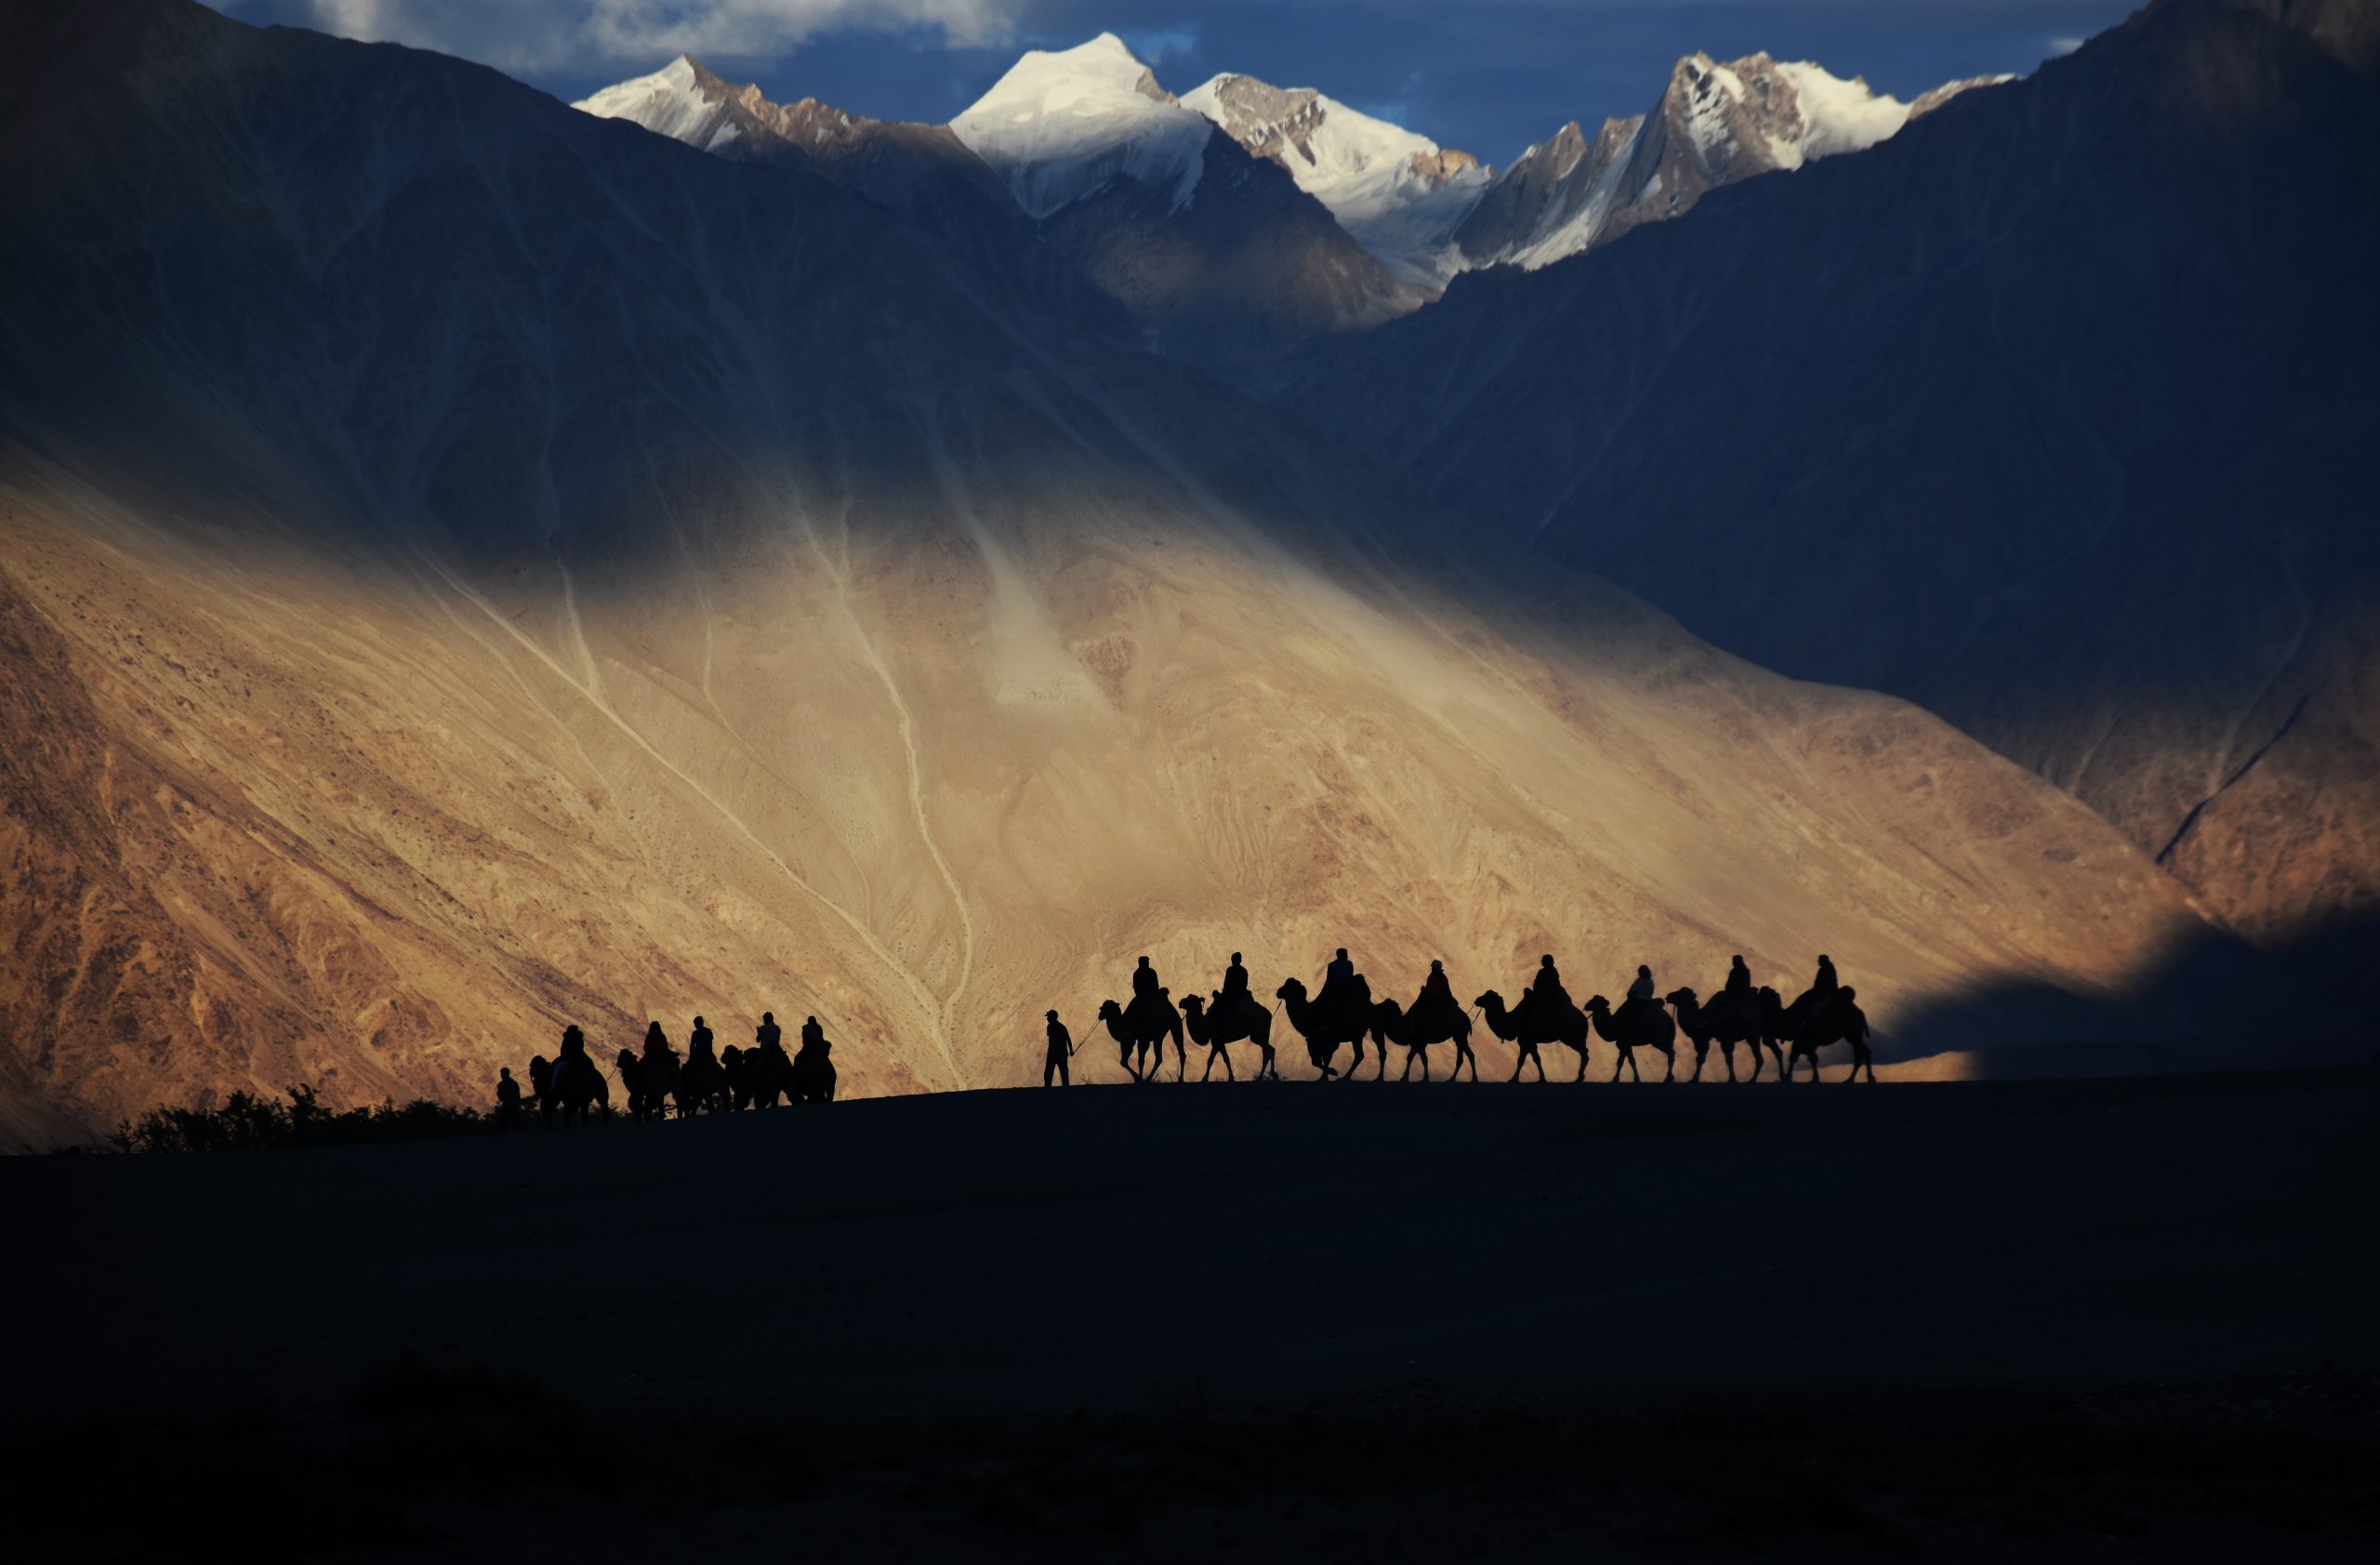 silhouette of people riding camels